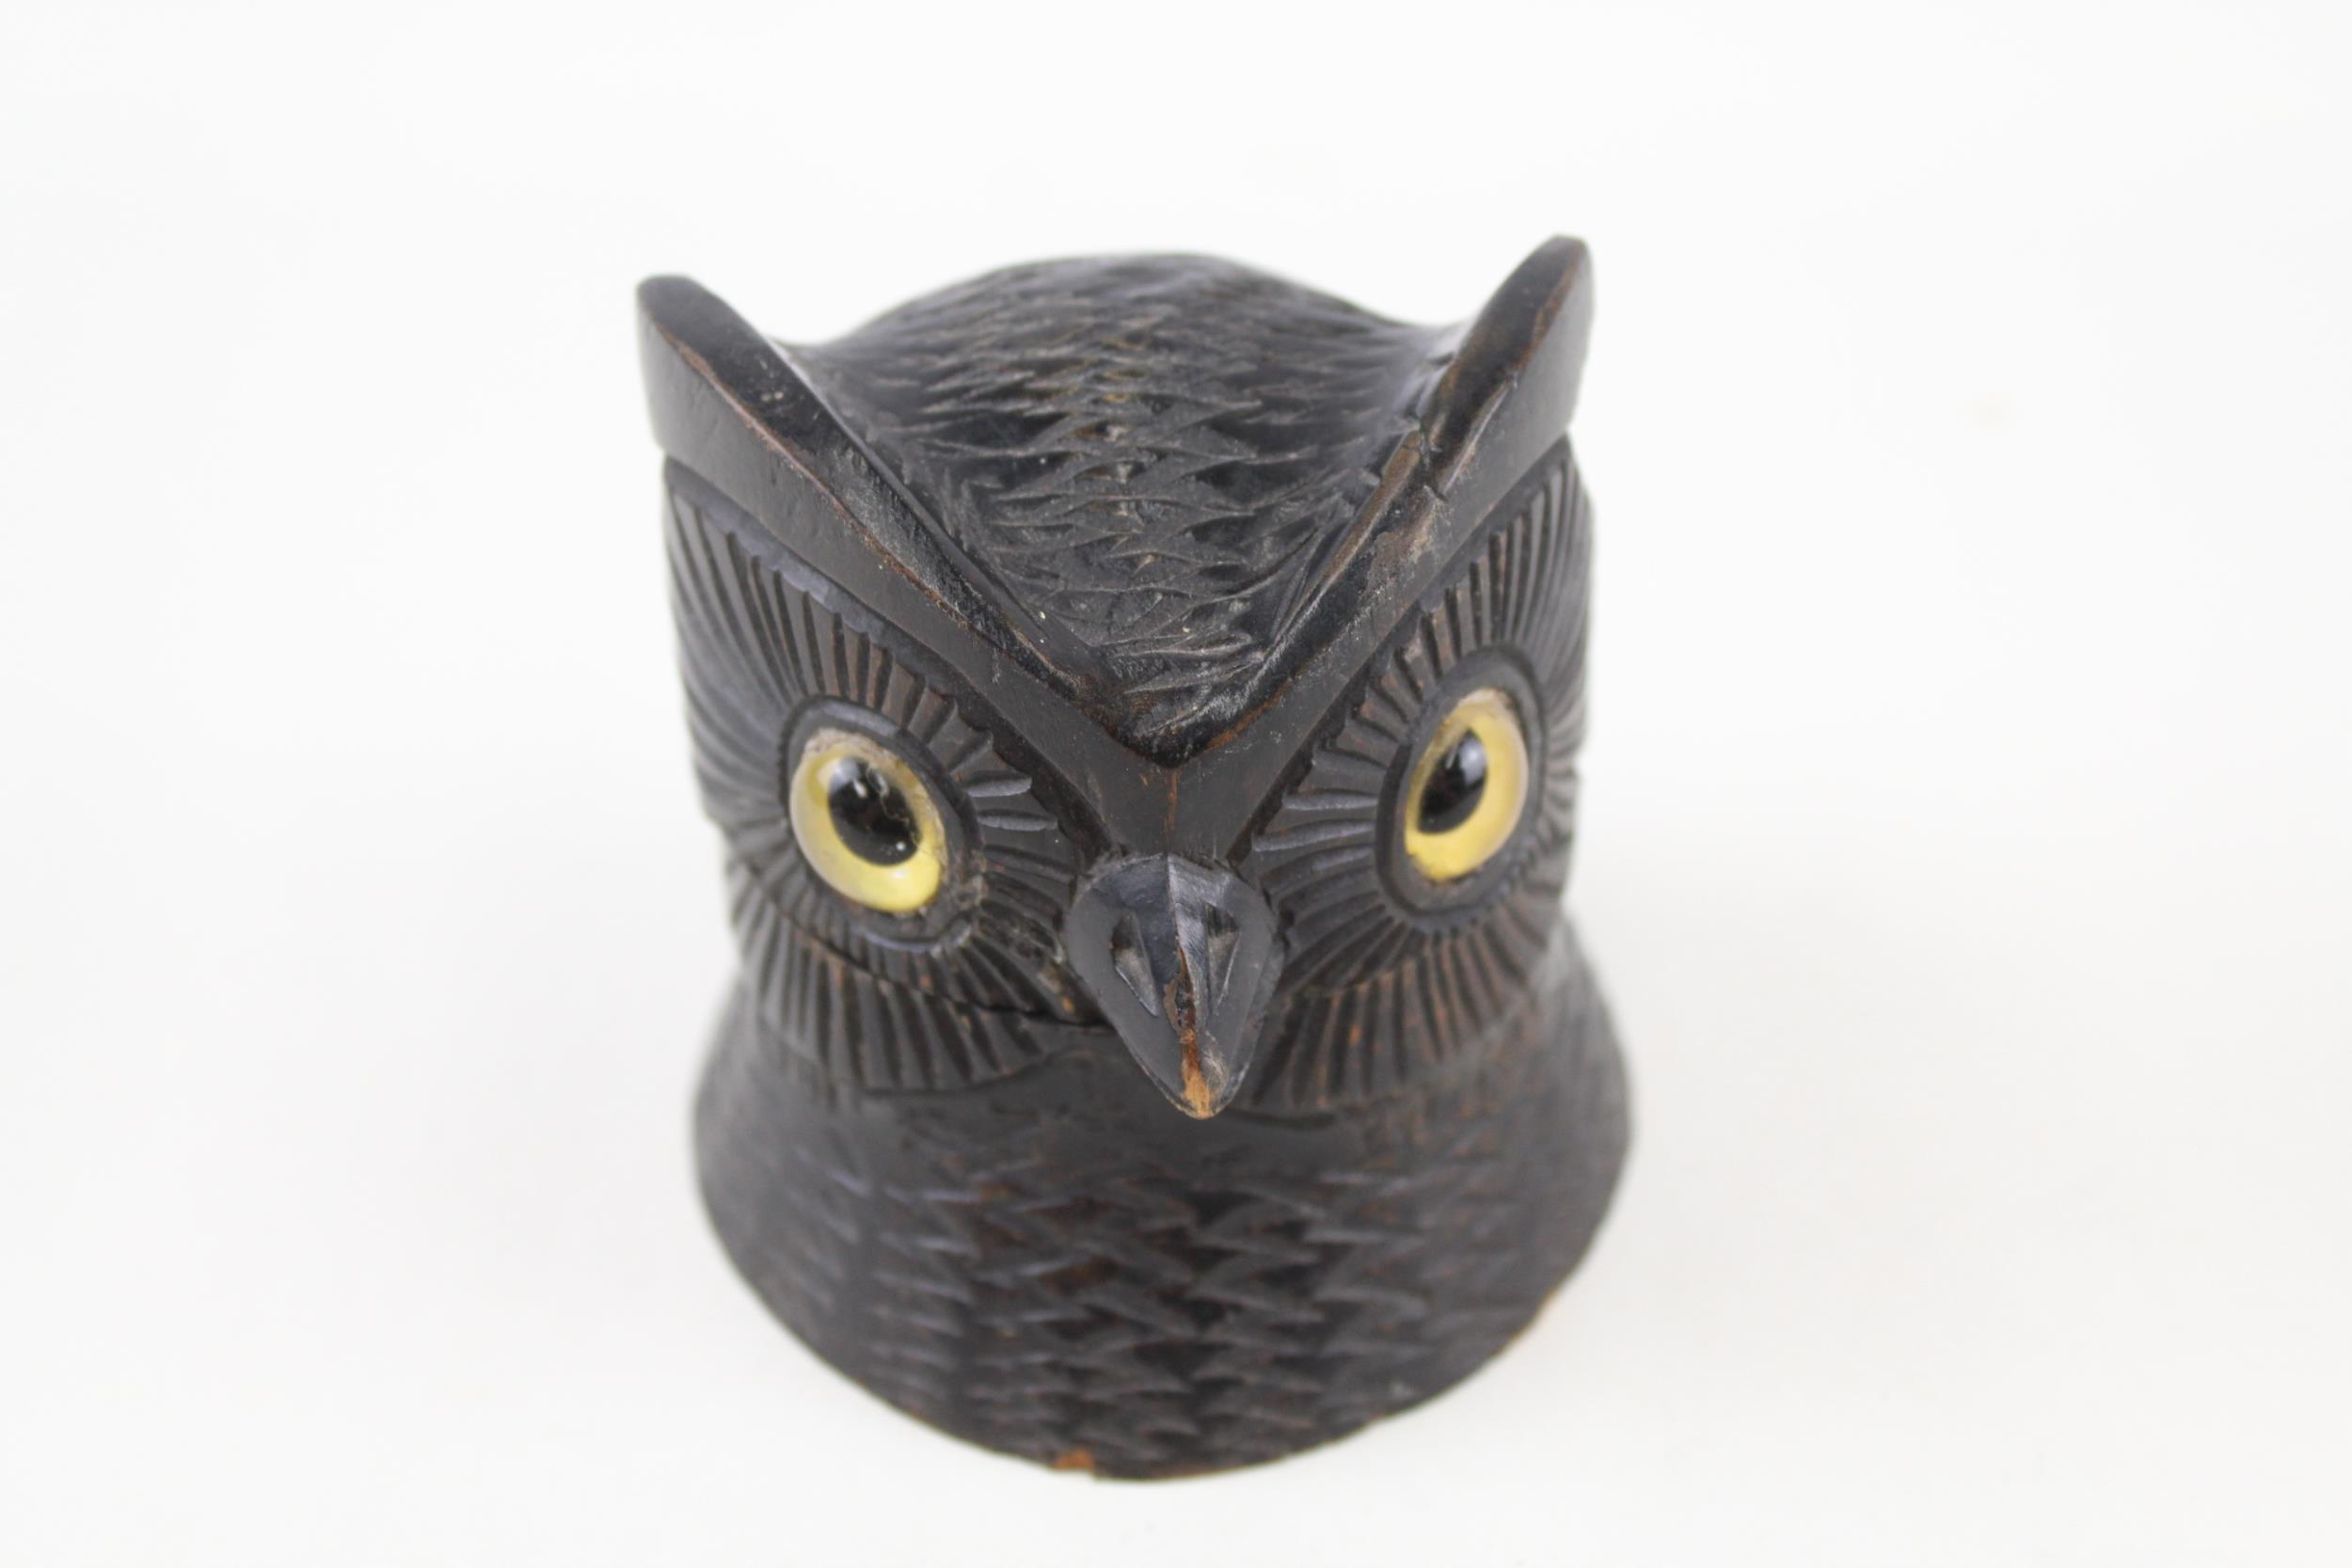 Antique 19th Century Black Forest Carved Wood Owl Head Inkwell - Height - 7.8cm In antique condition